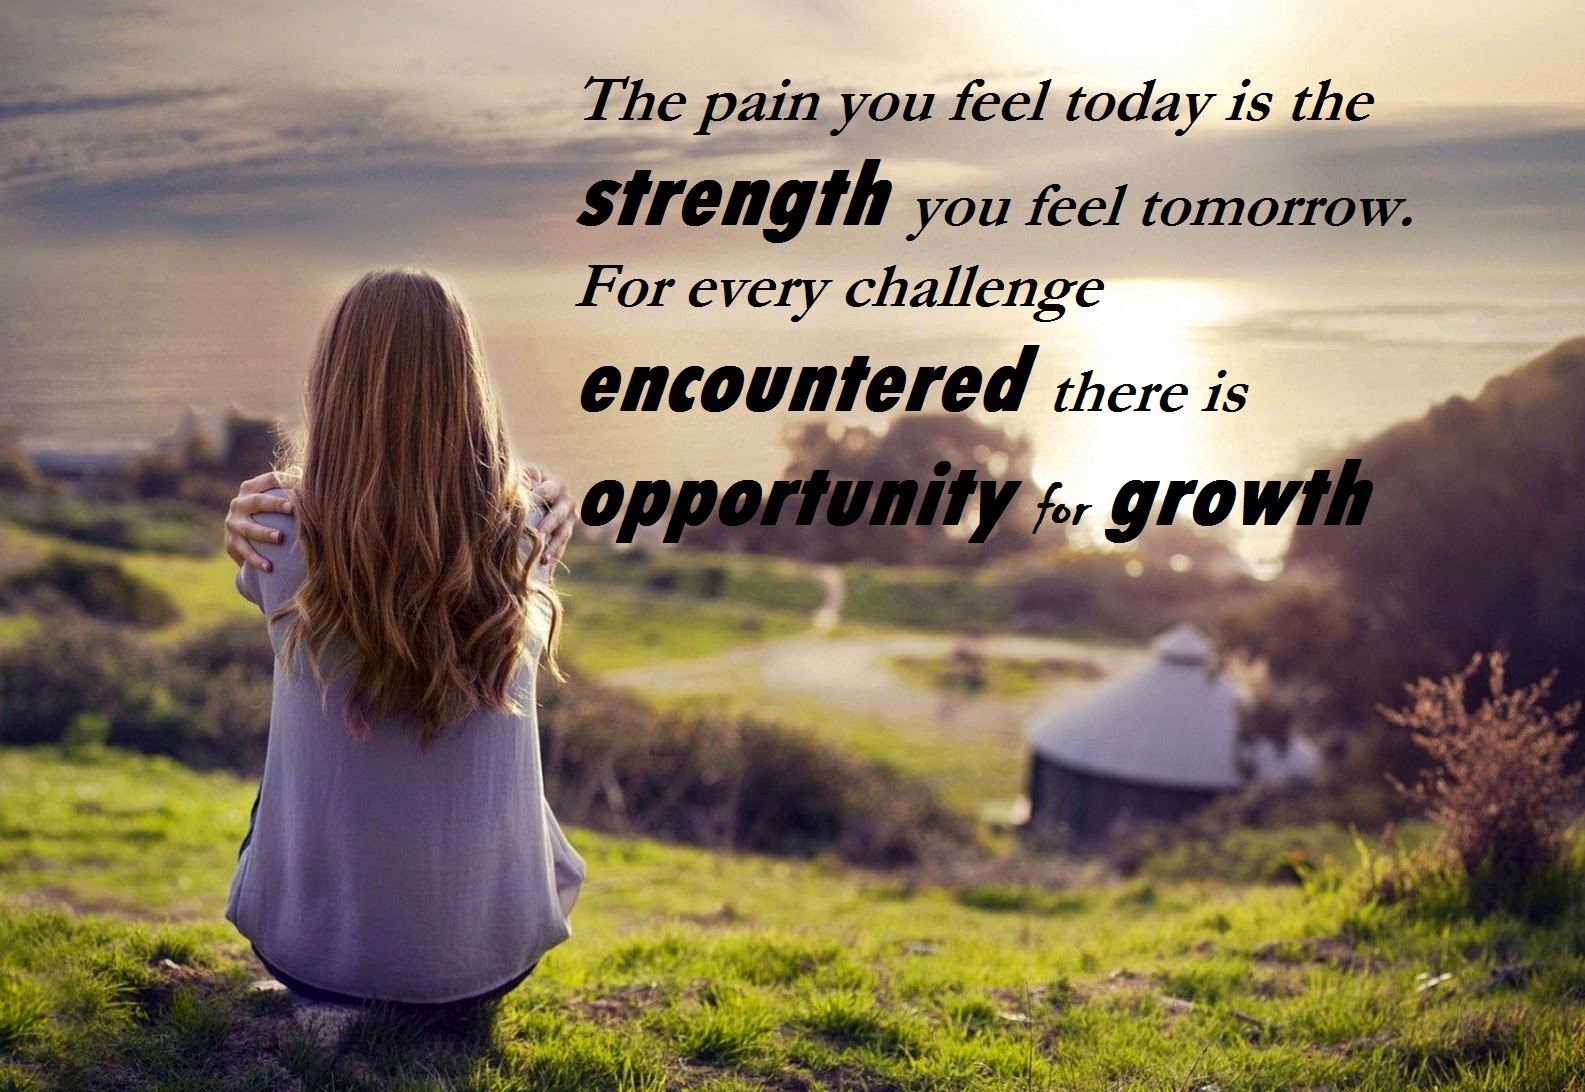 A girl sitting on a hilltop with long brown hair and a purple shirt looking out at a scenic landscape with the text superimposed, "The pain you feel today is the strength you feel tomorrow. For every challenge encountered there is opportunity for growth."